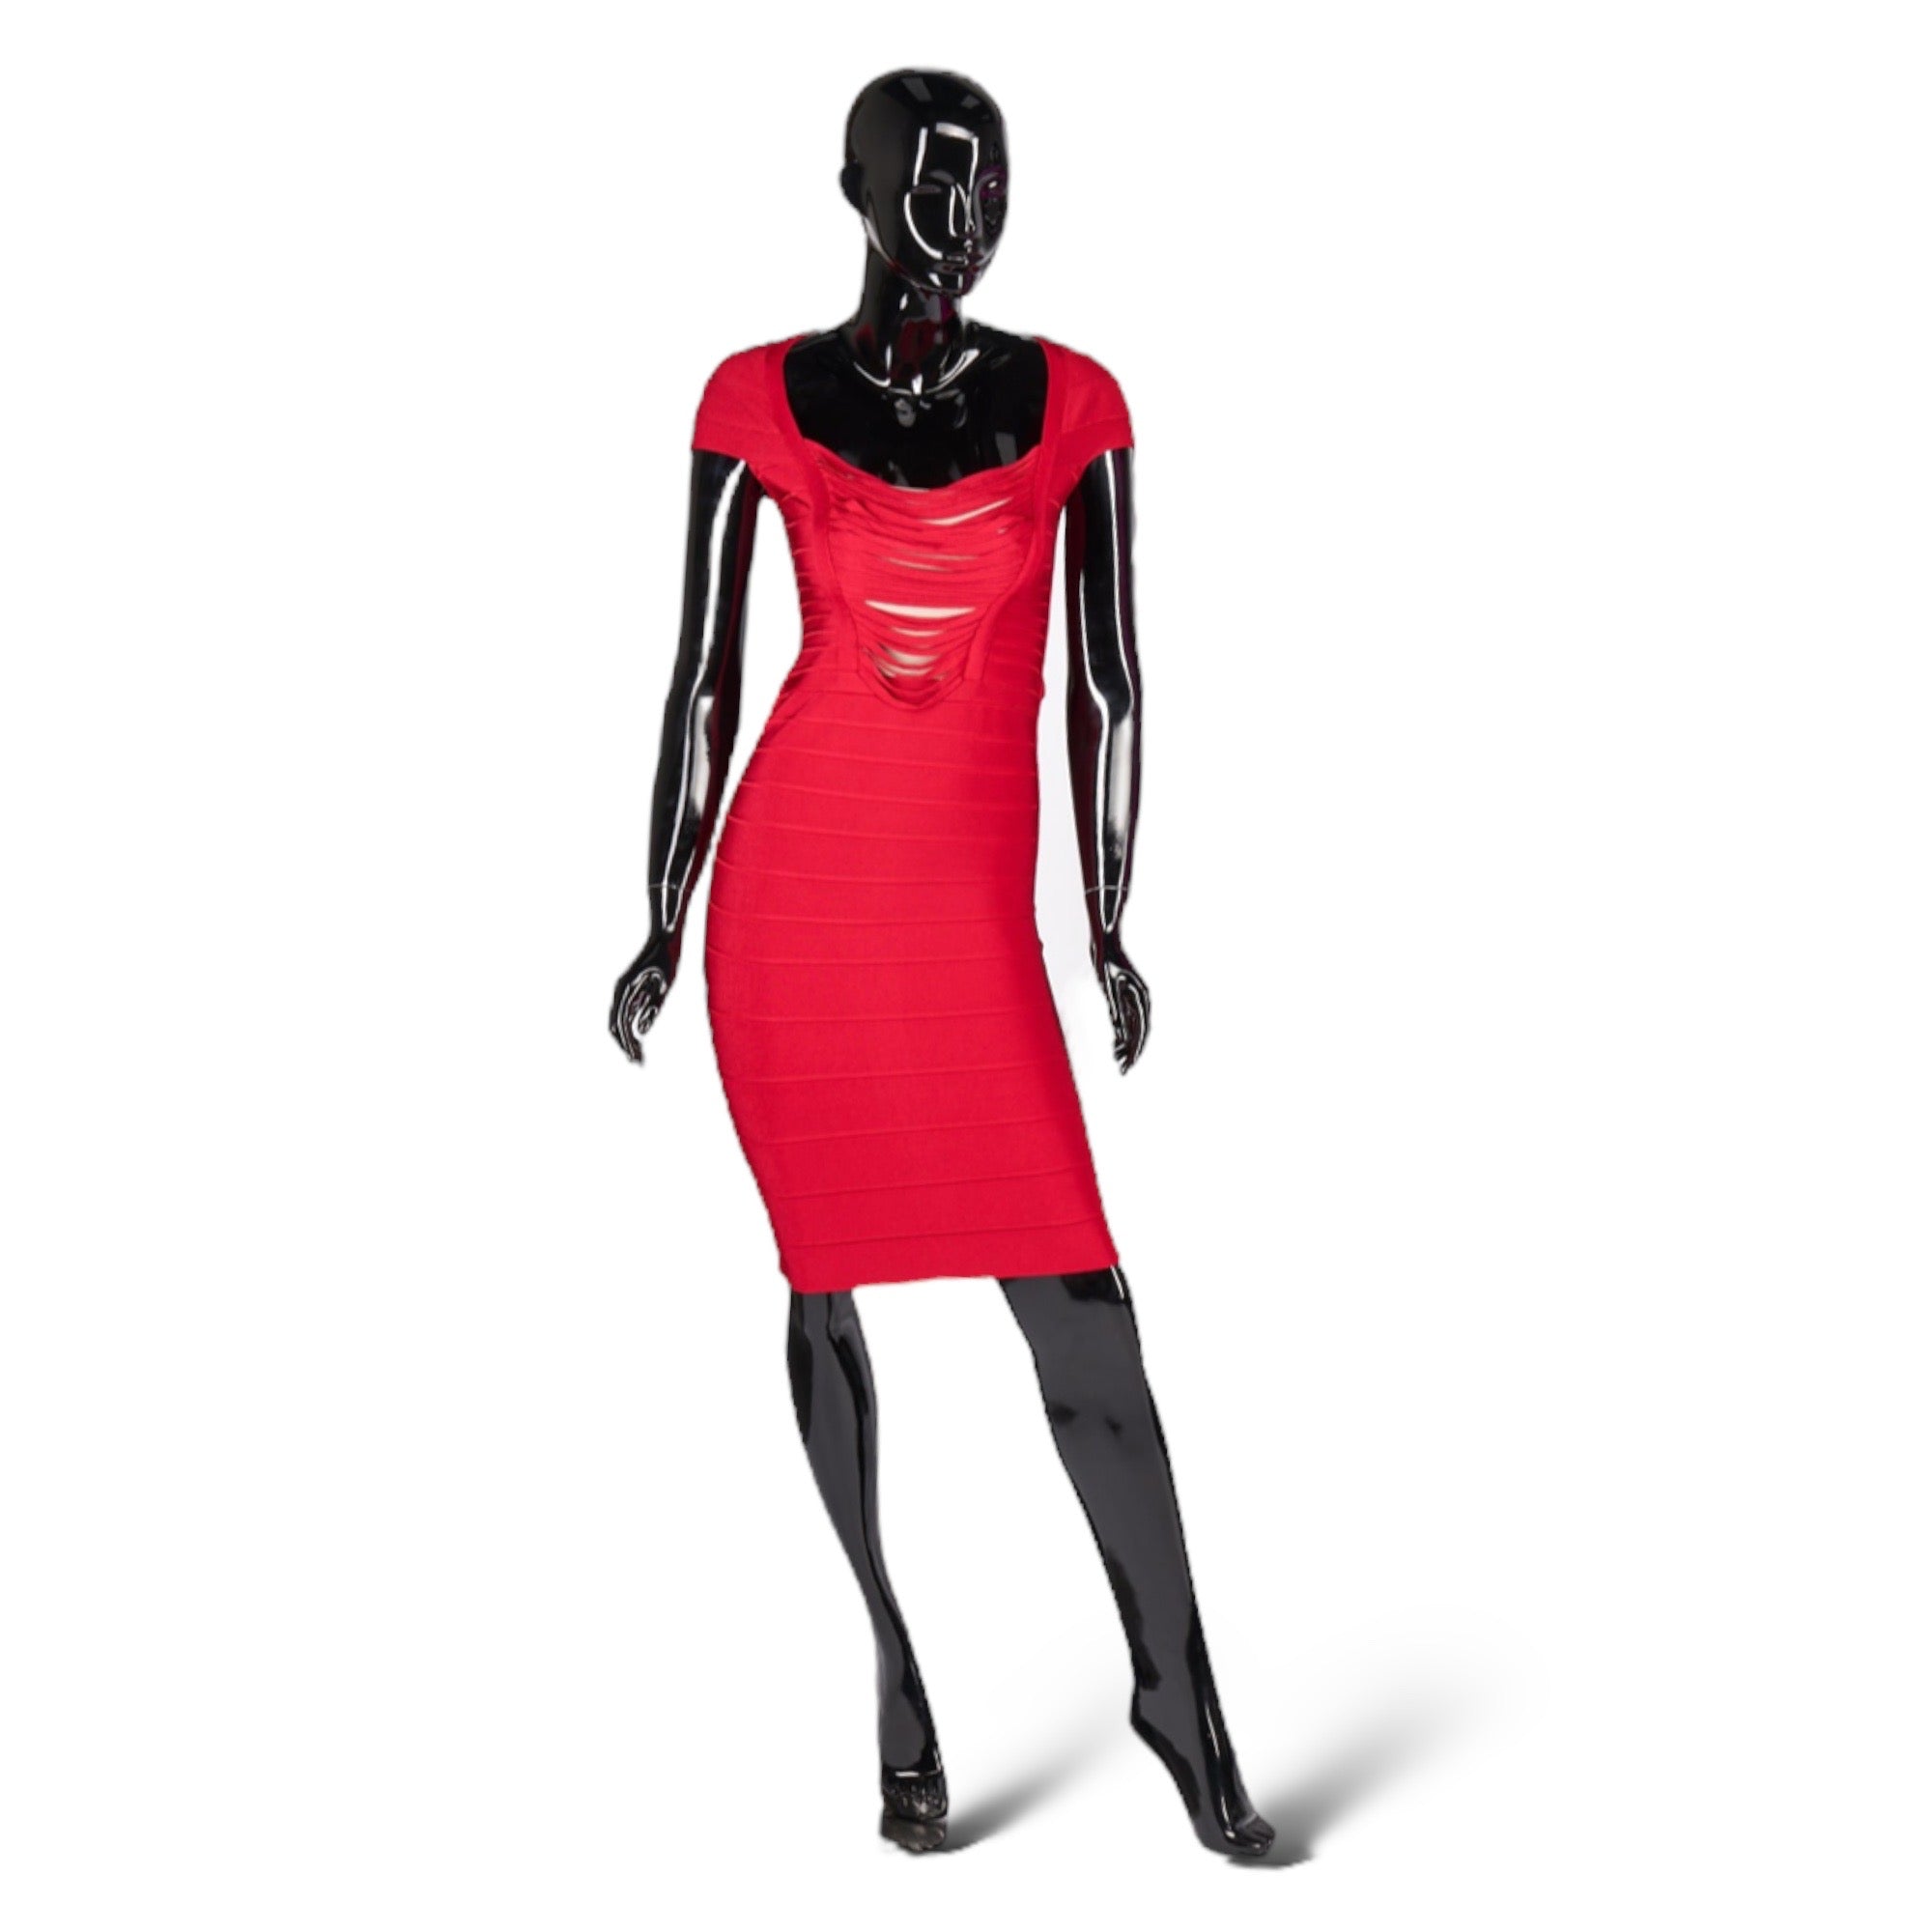 HERVE LEGER "ANNE" Dress in Rouge with Draped Fringe Insert | Size: Small |